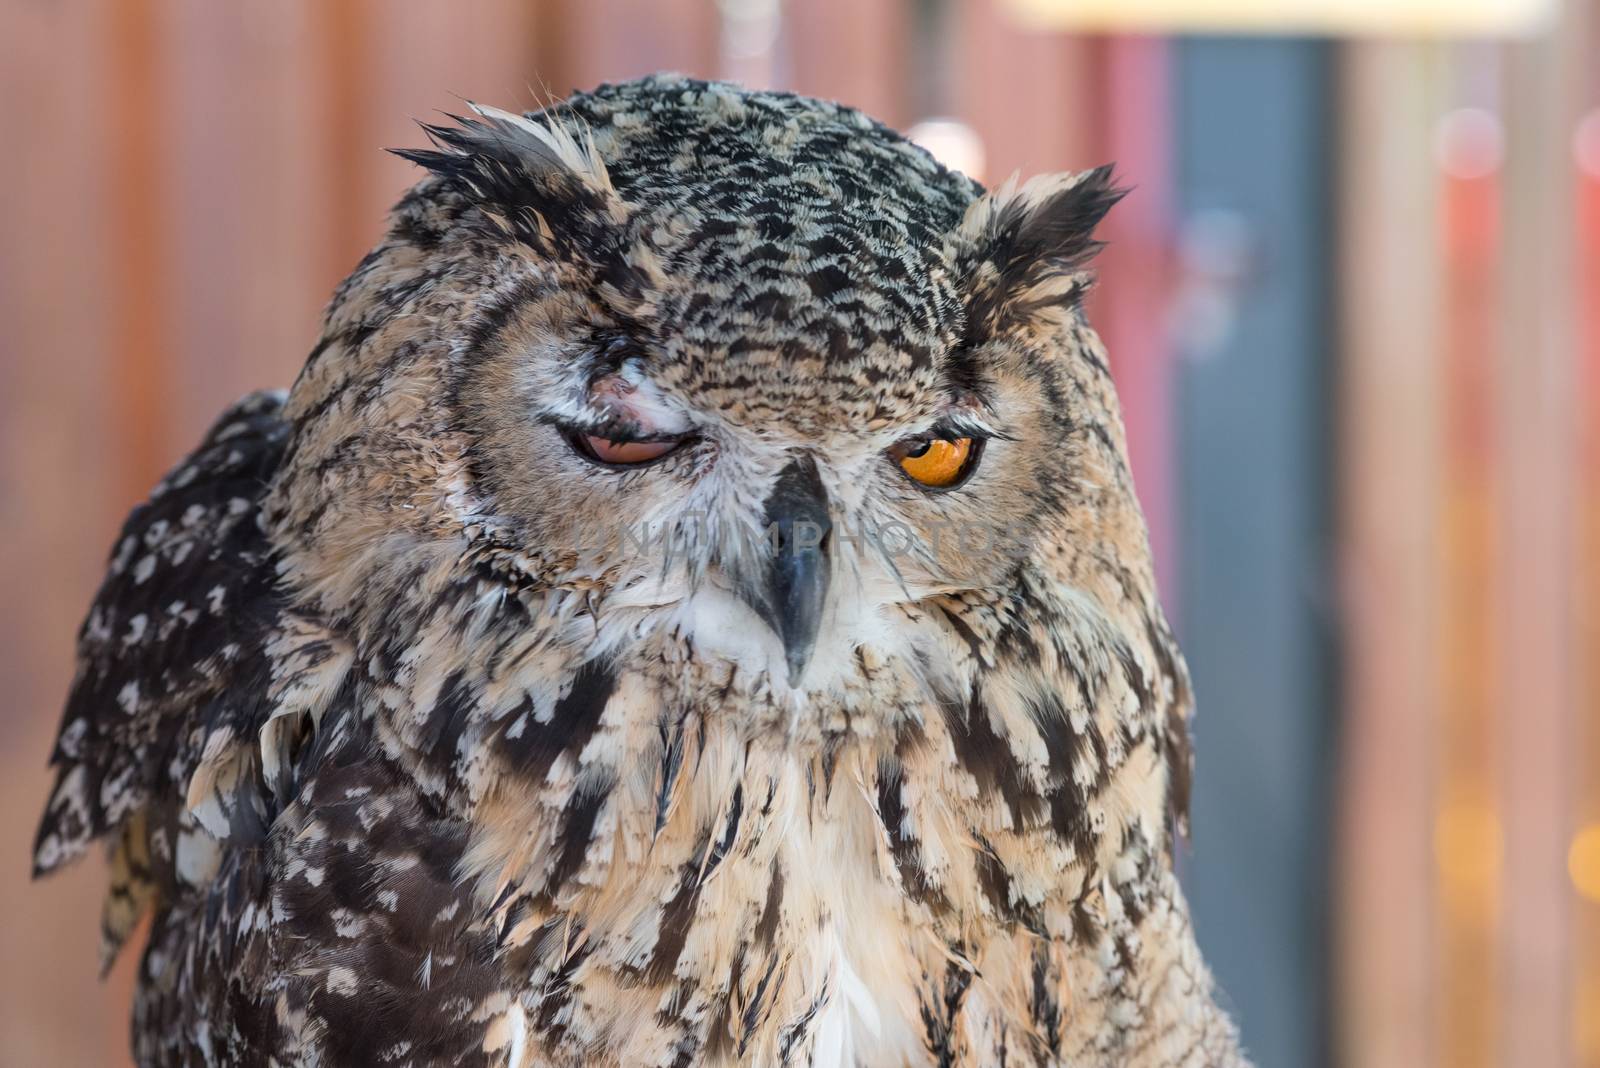 A close up shot of an owl that looks drunk or skeepy with one eye slightly closed.